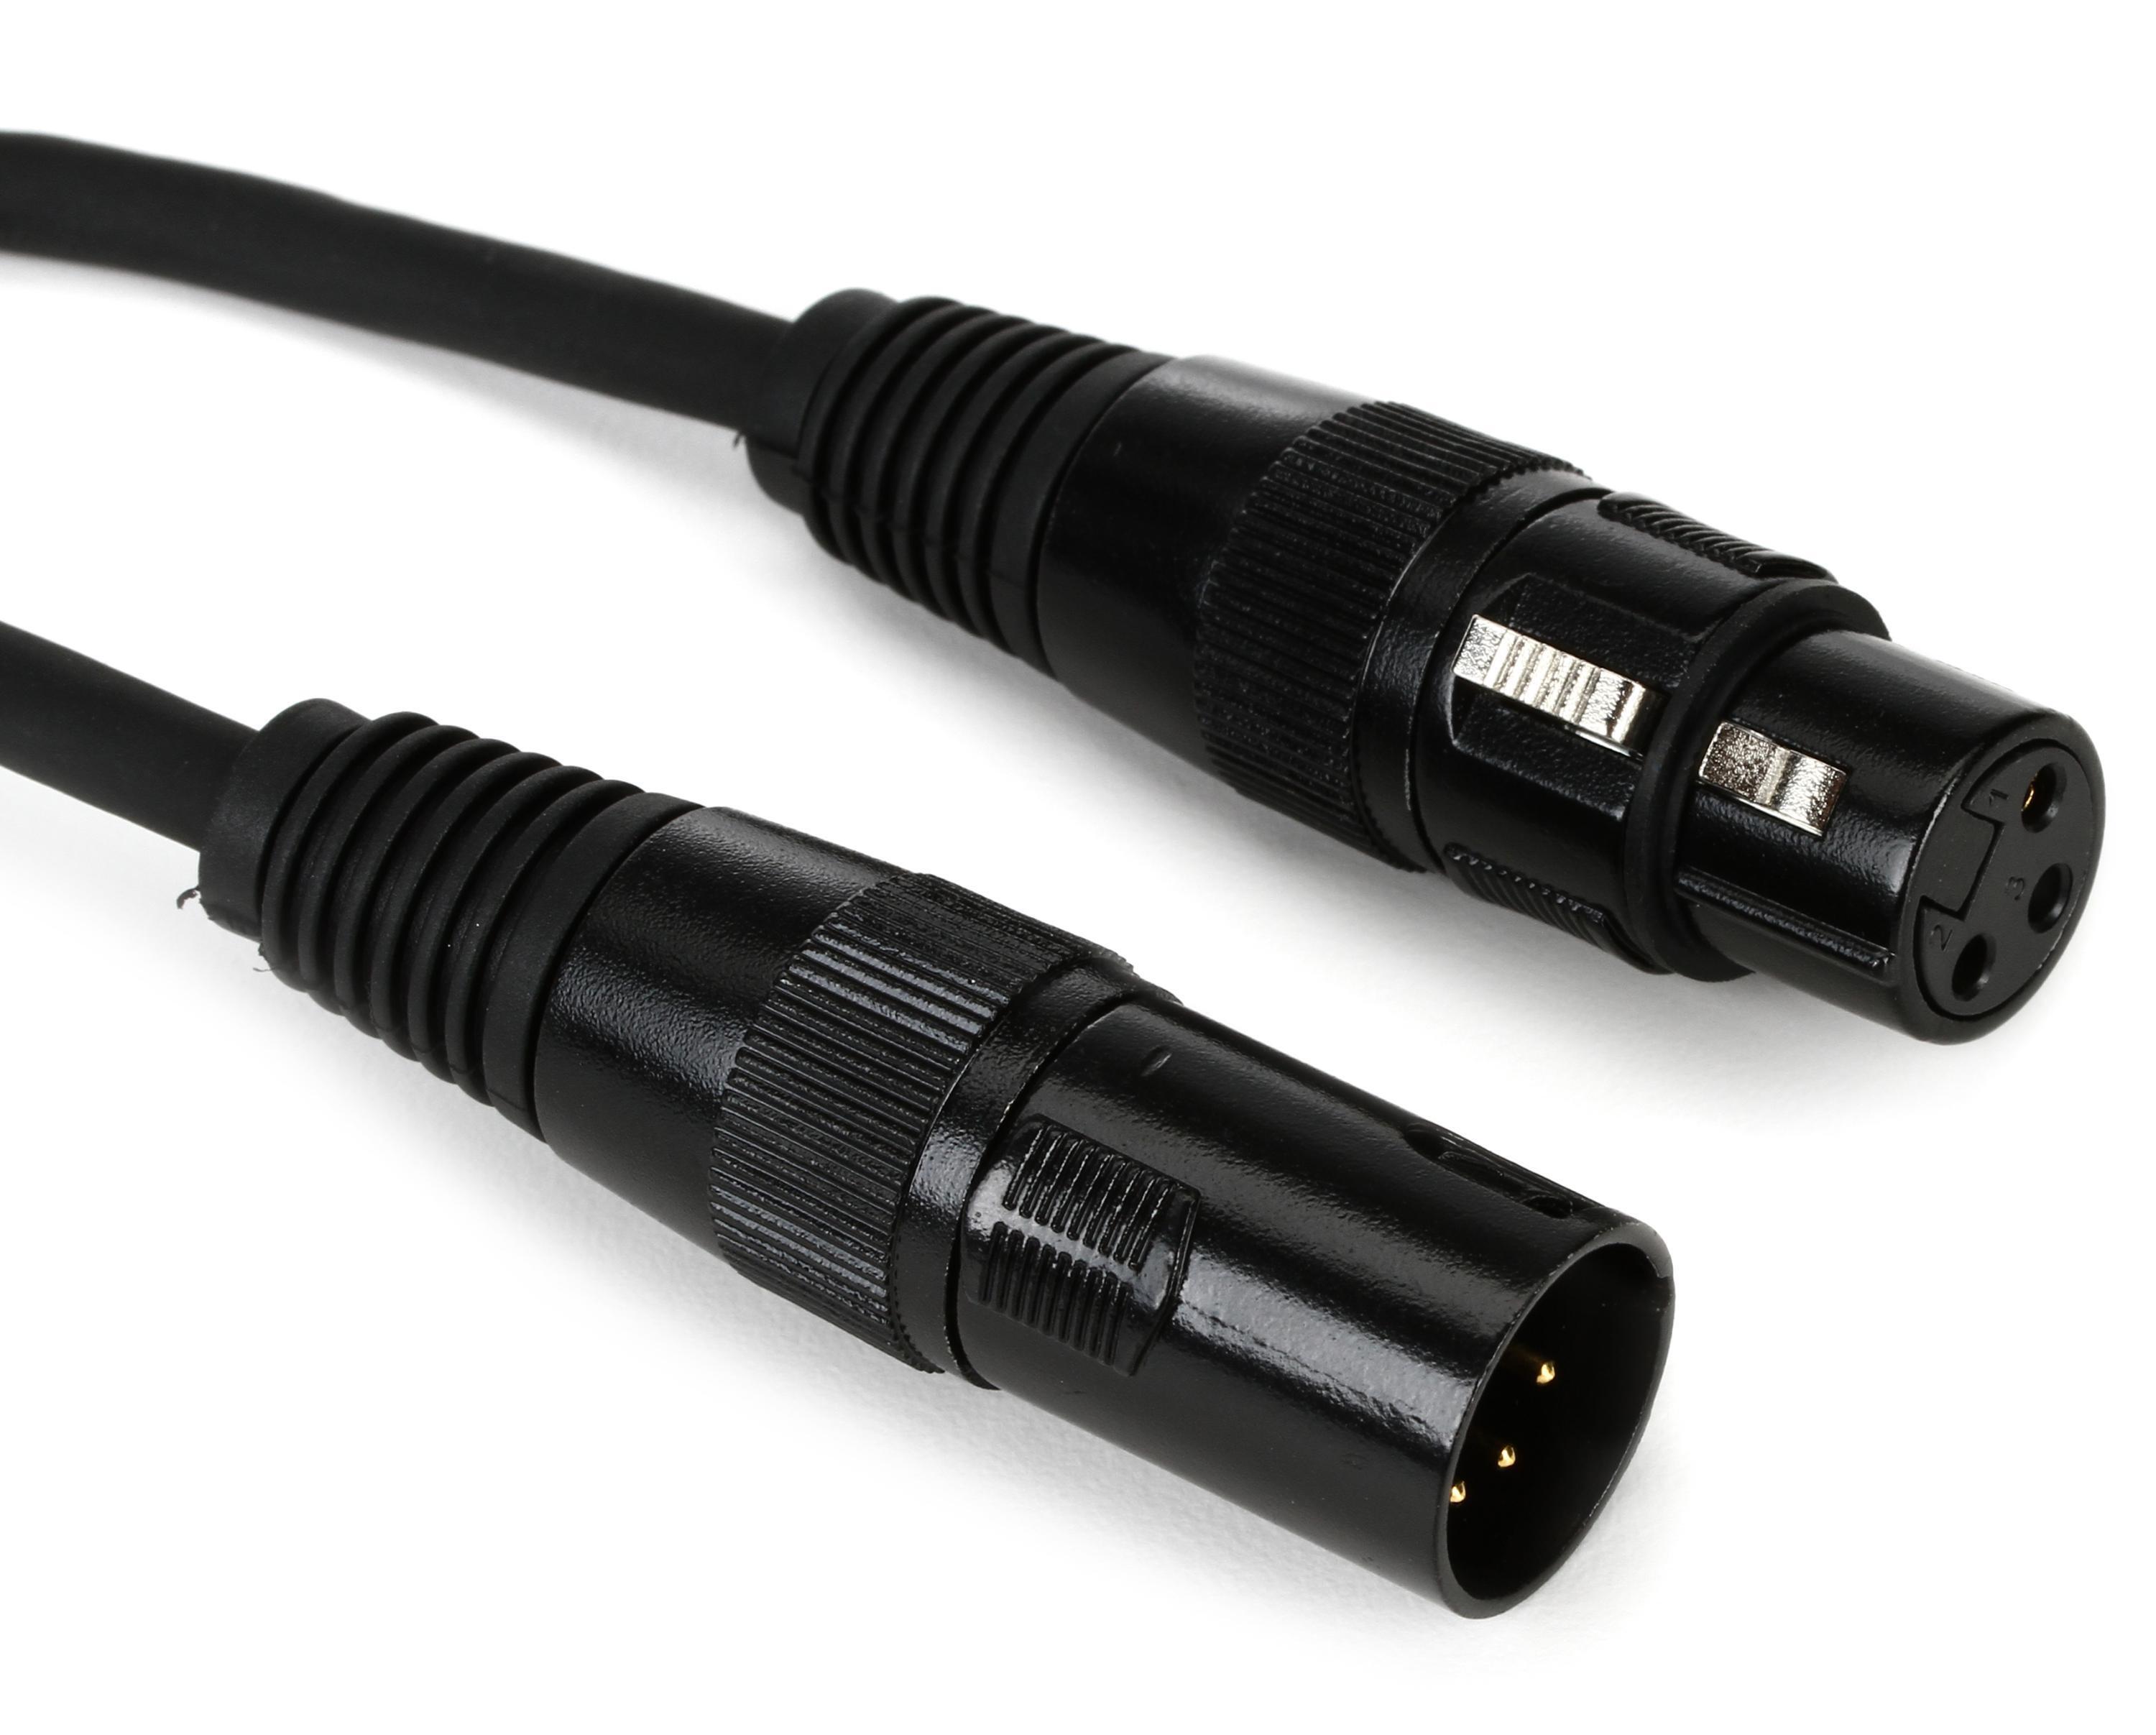 Accu-Cable 3-Pin XLR 5ft DMX Light Cable 4 Pack